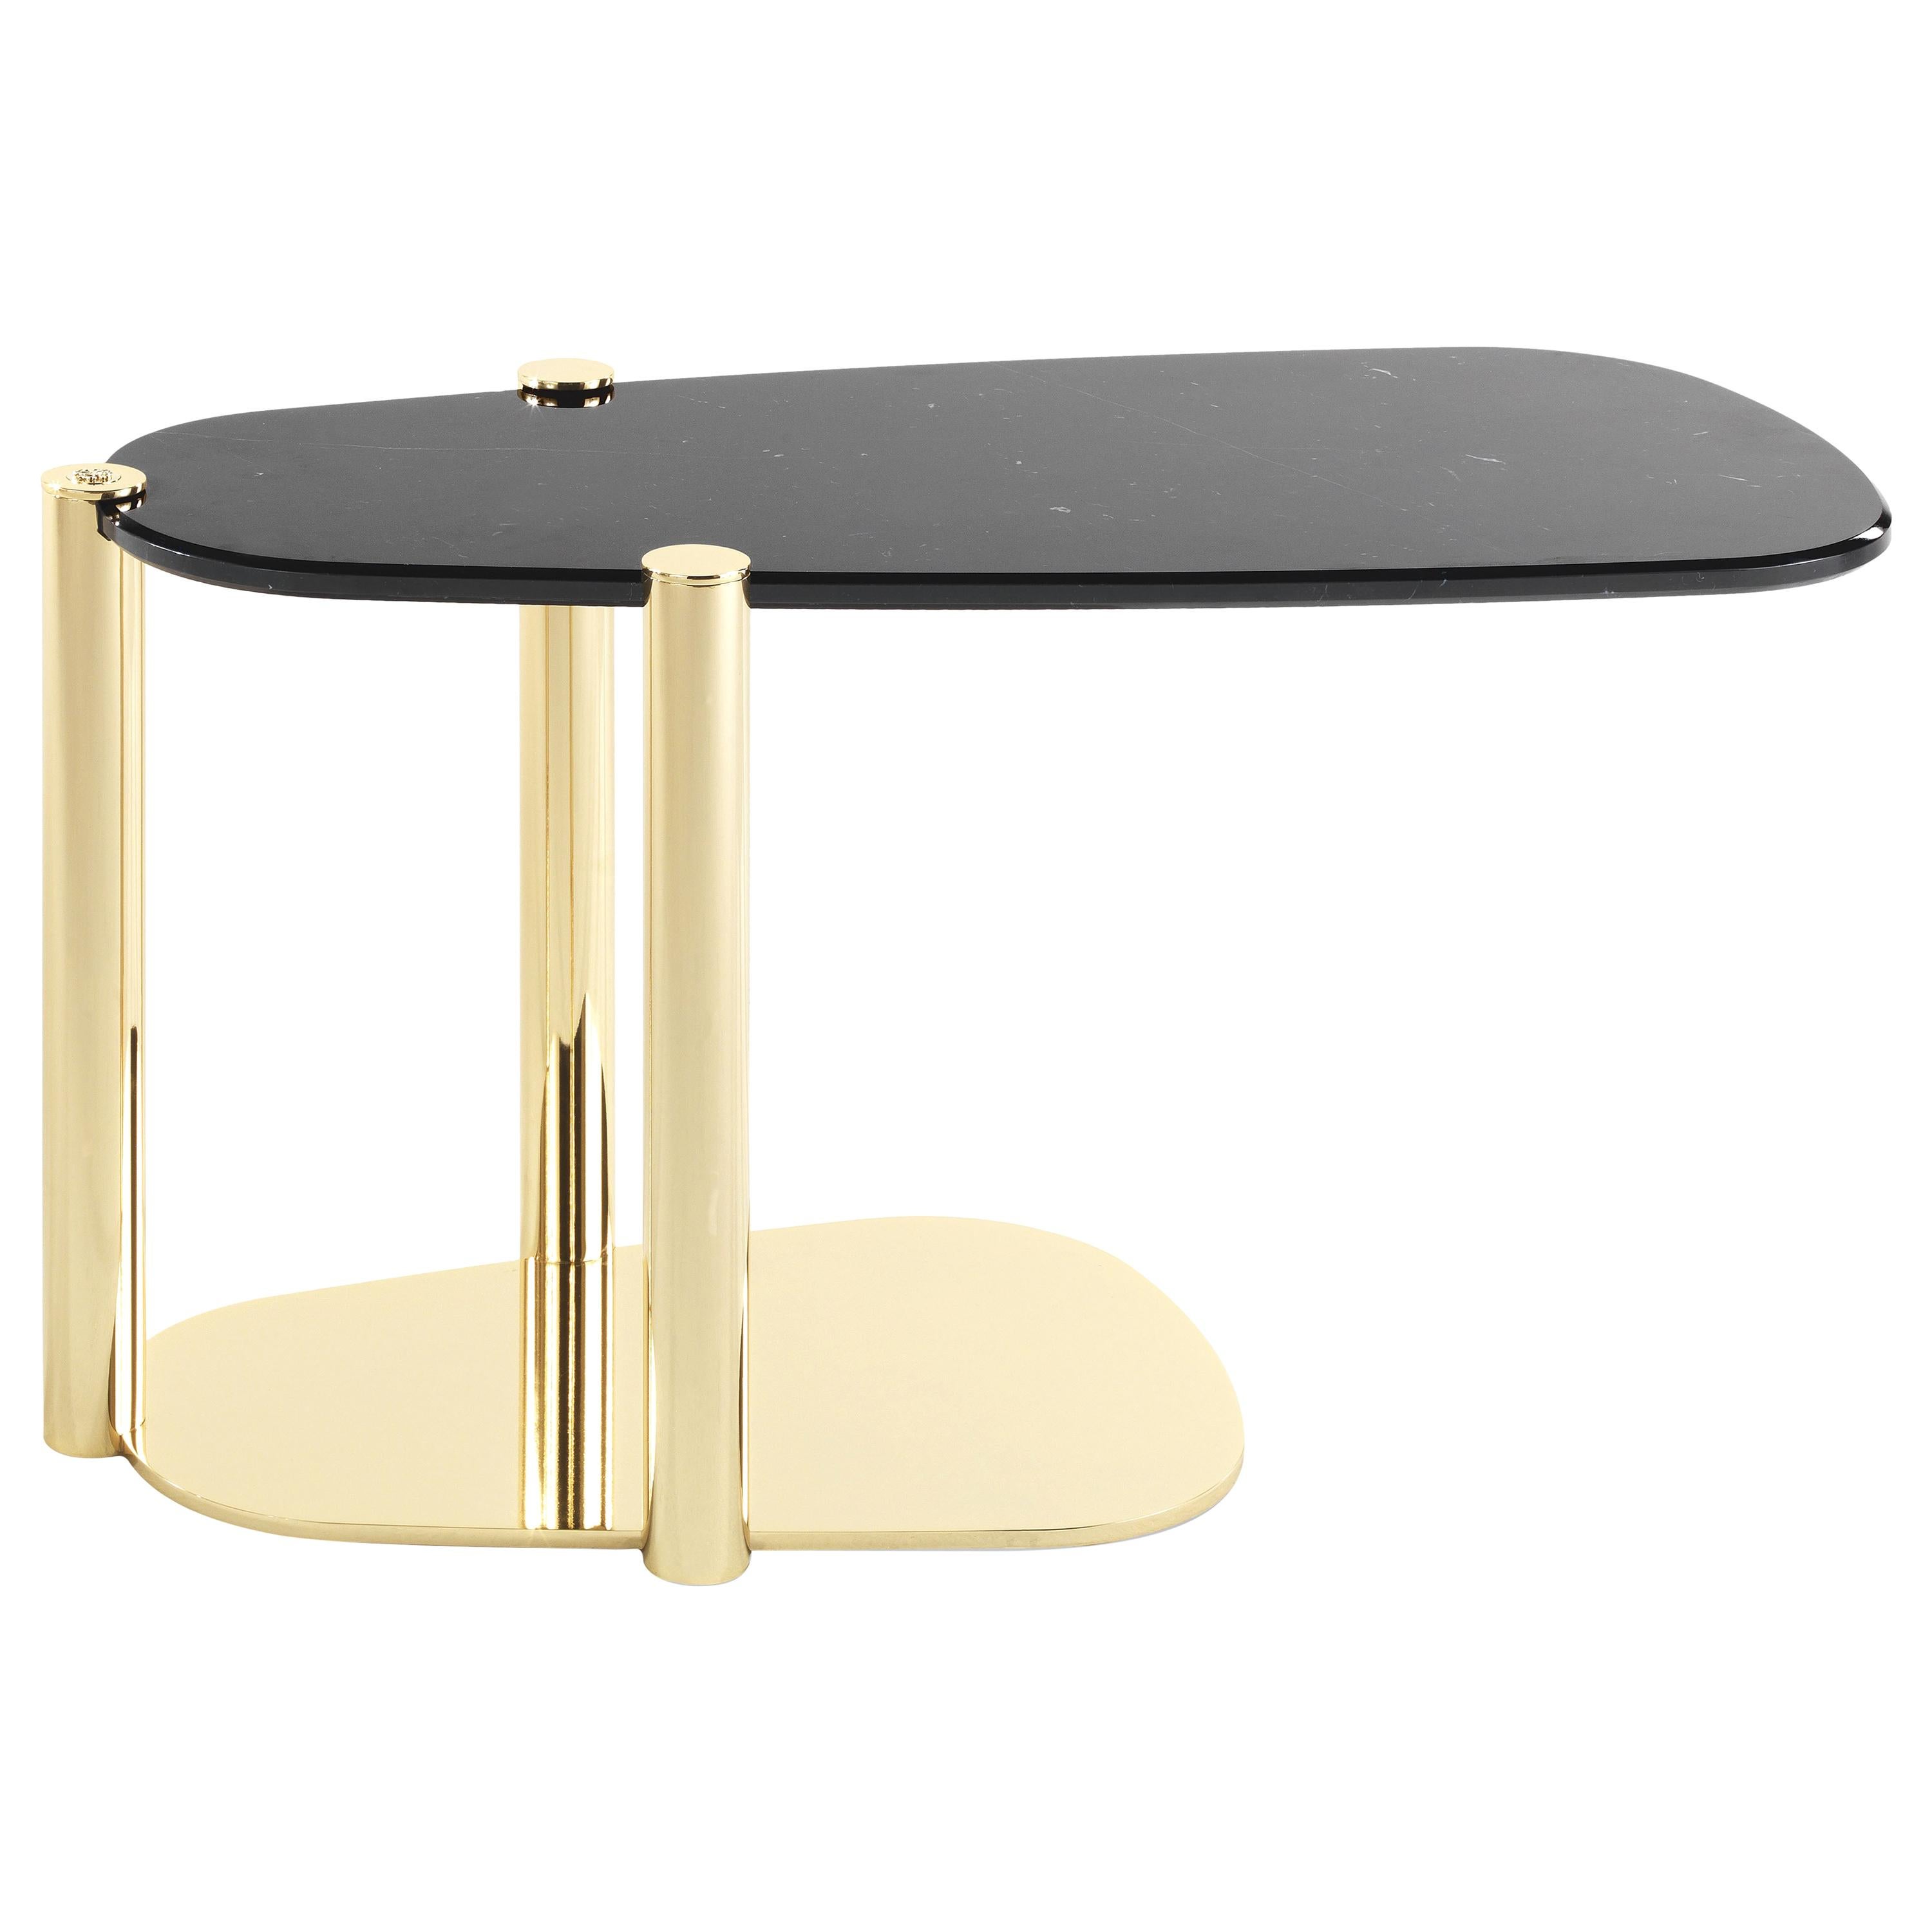 Roberto Cavalli Home Interiors Trinidad Side Table with Marble Top